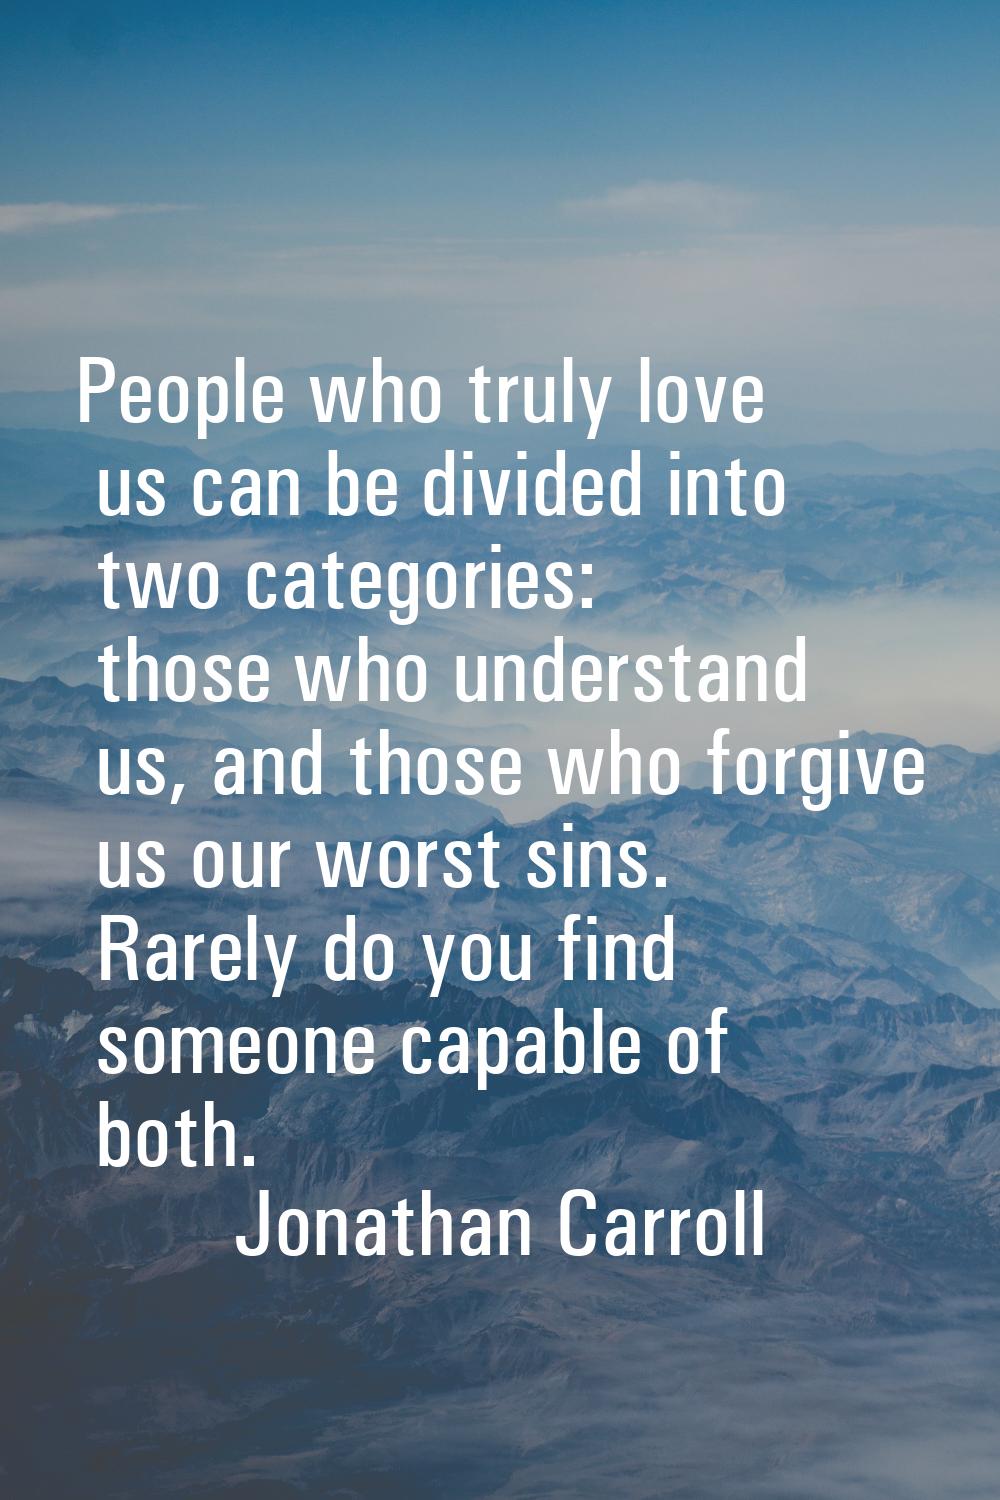 People who truly love us can be divided into two categories: those who understand us, and those who